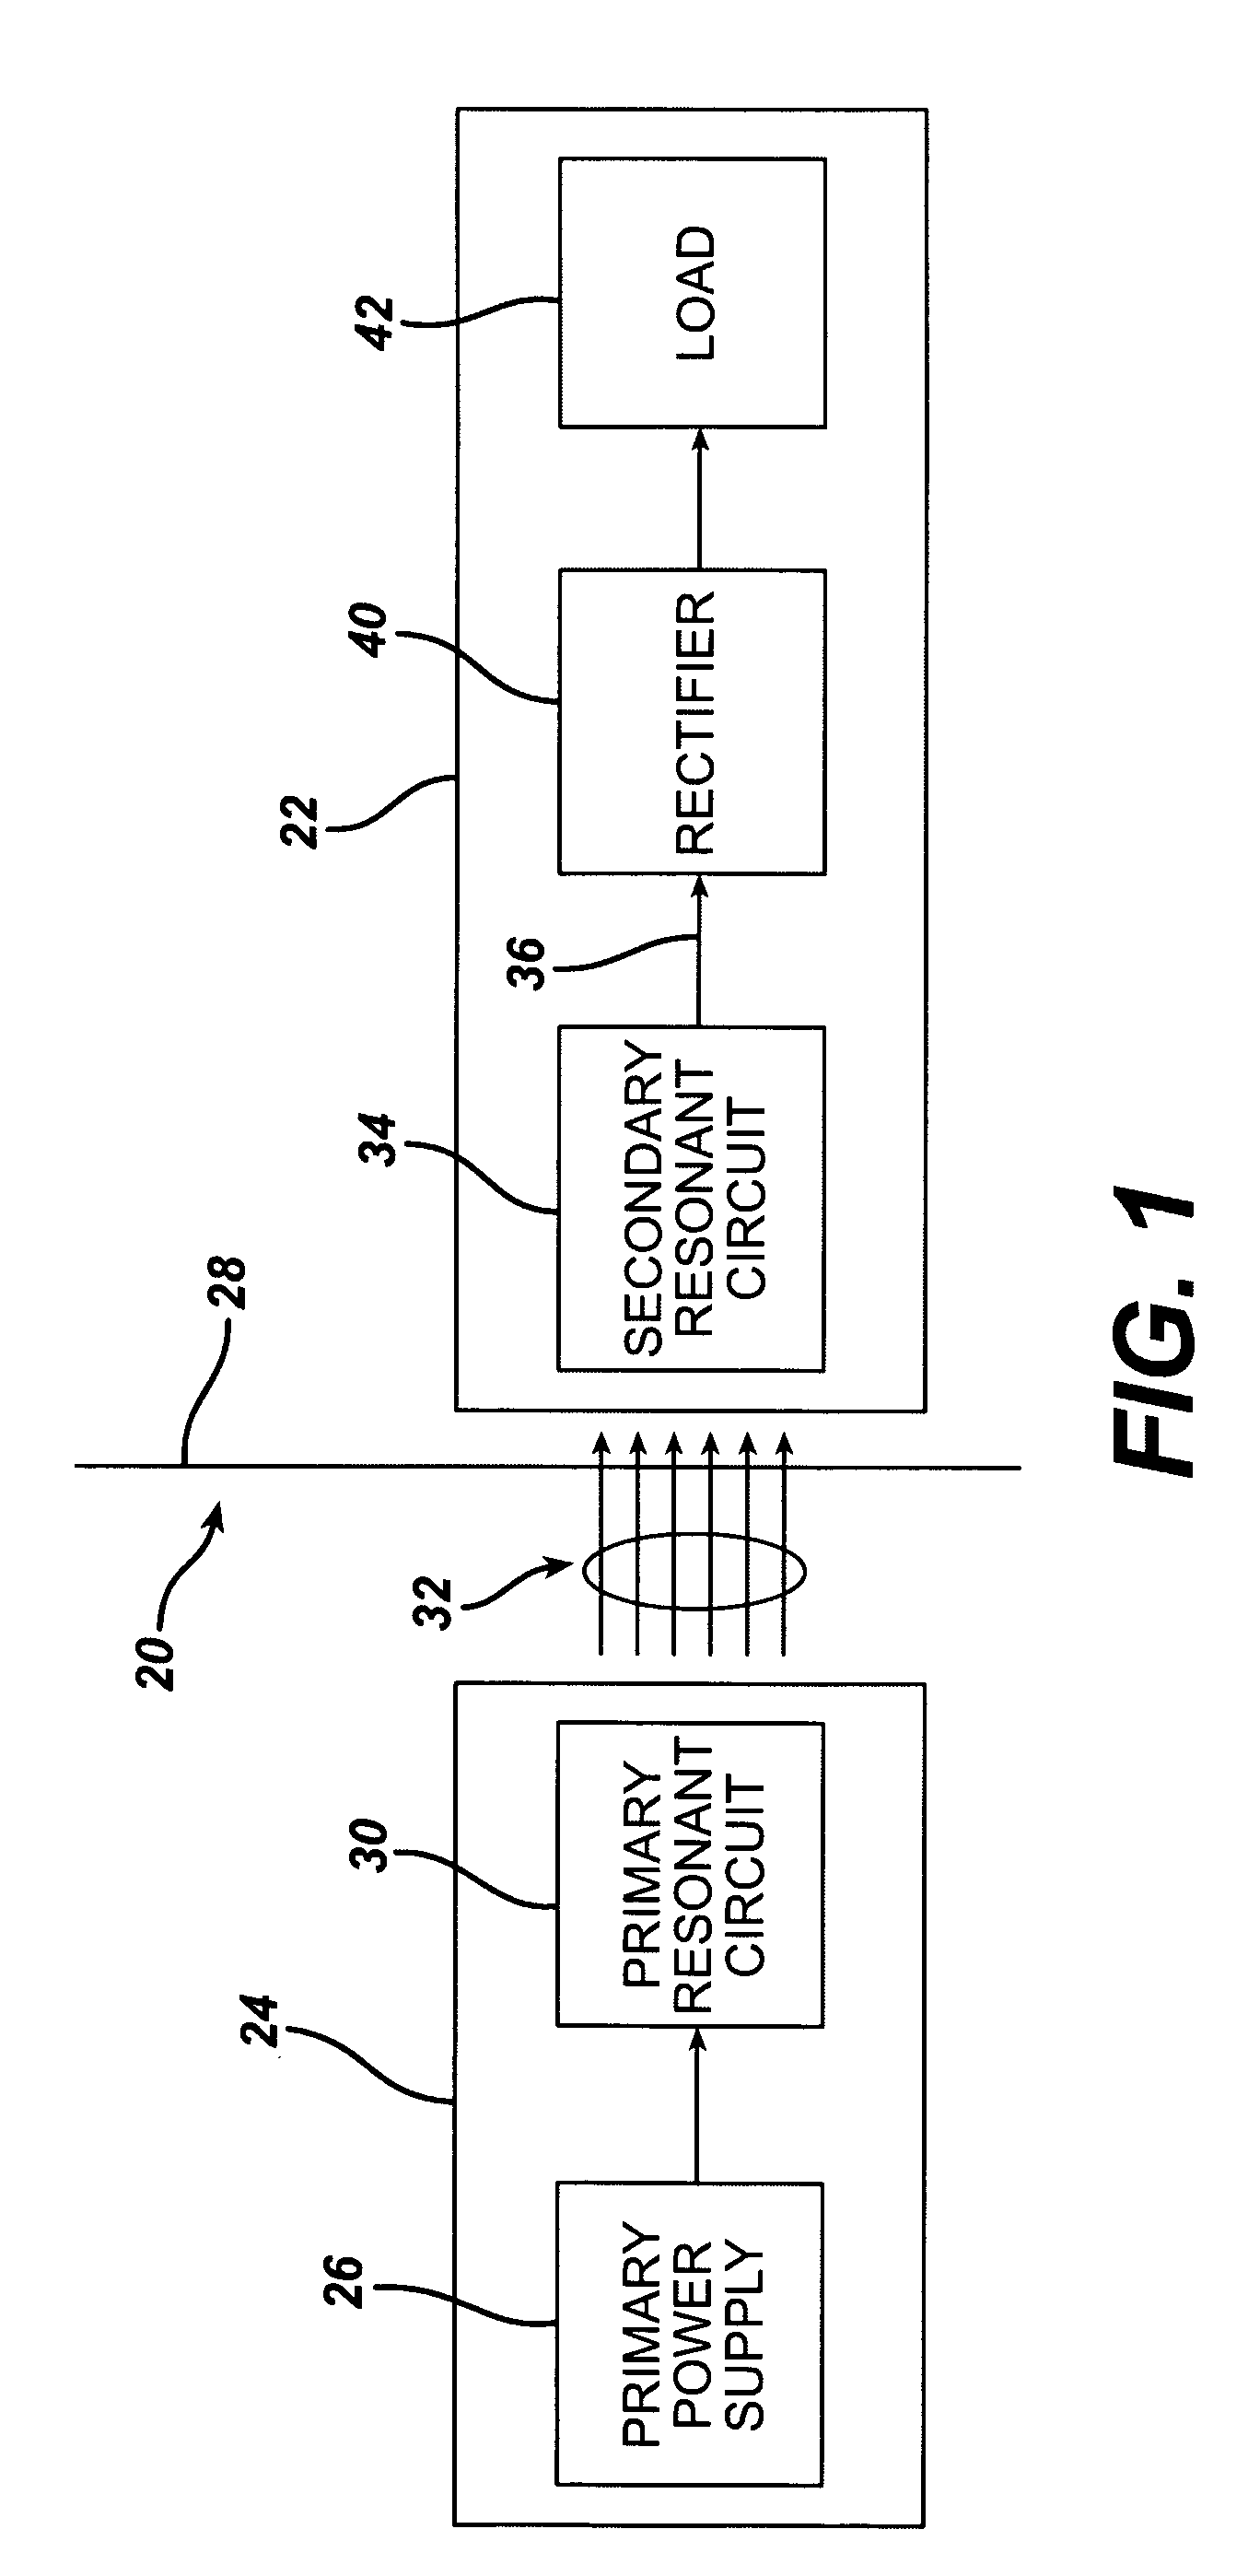 Low frequency transcutaneous energy transfer to implanted medical device